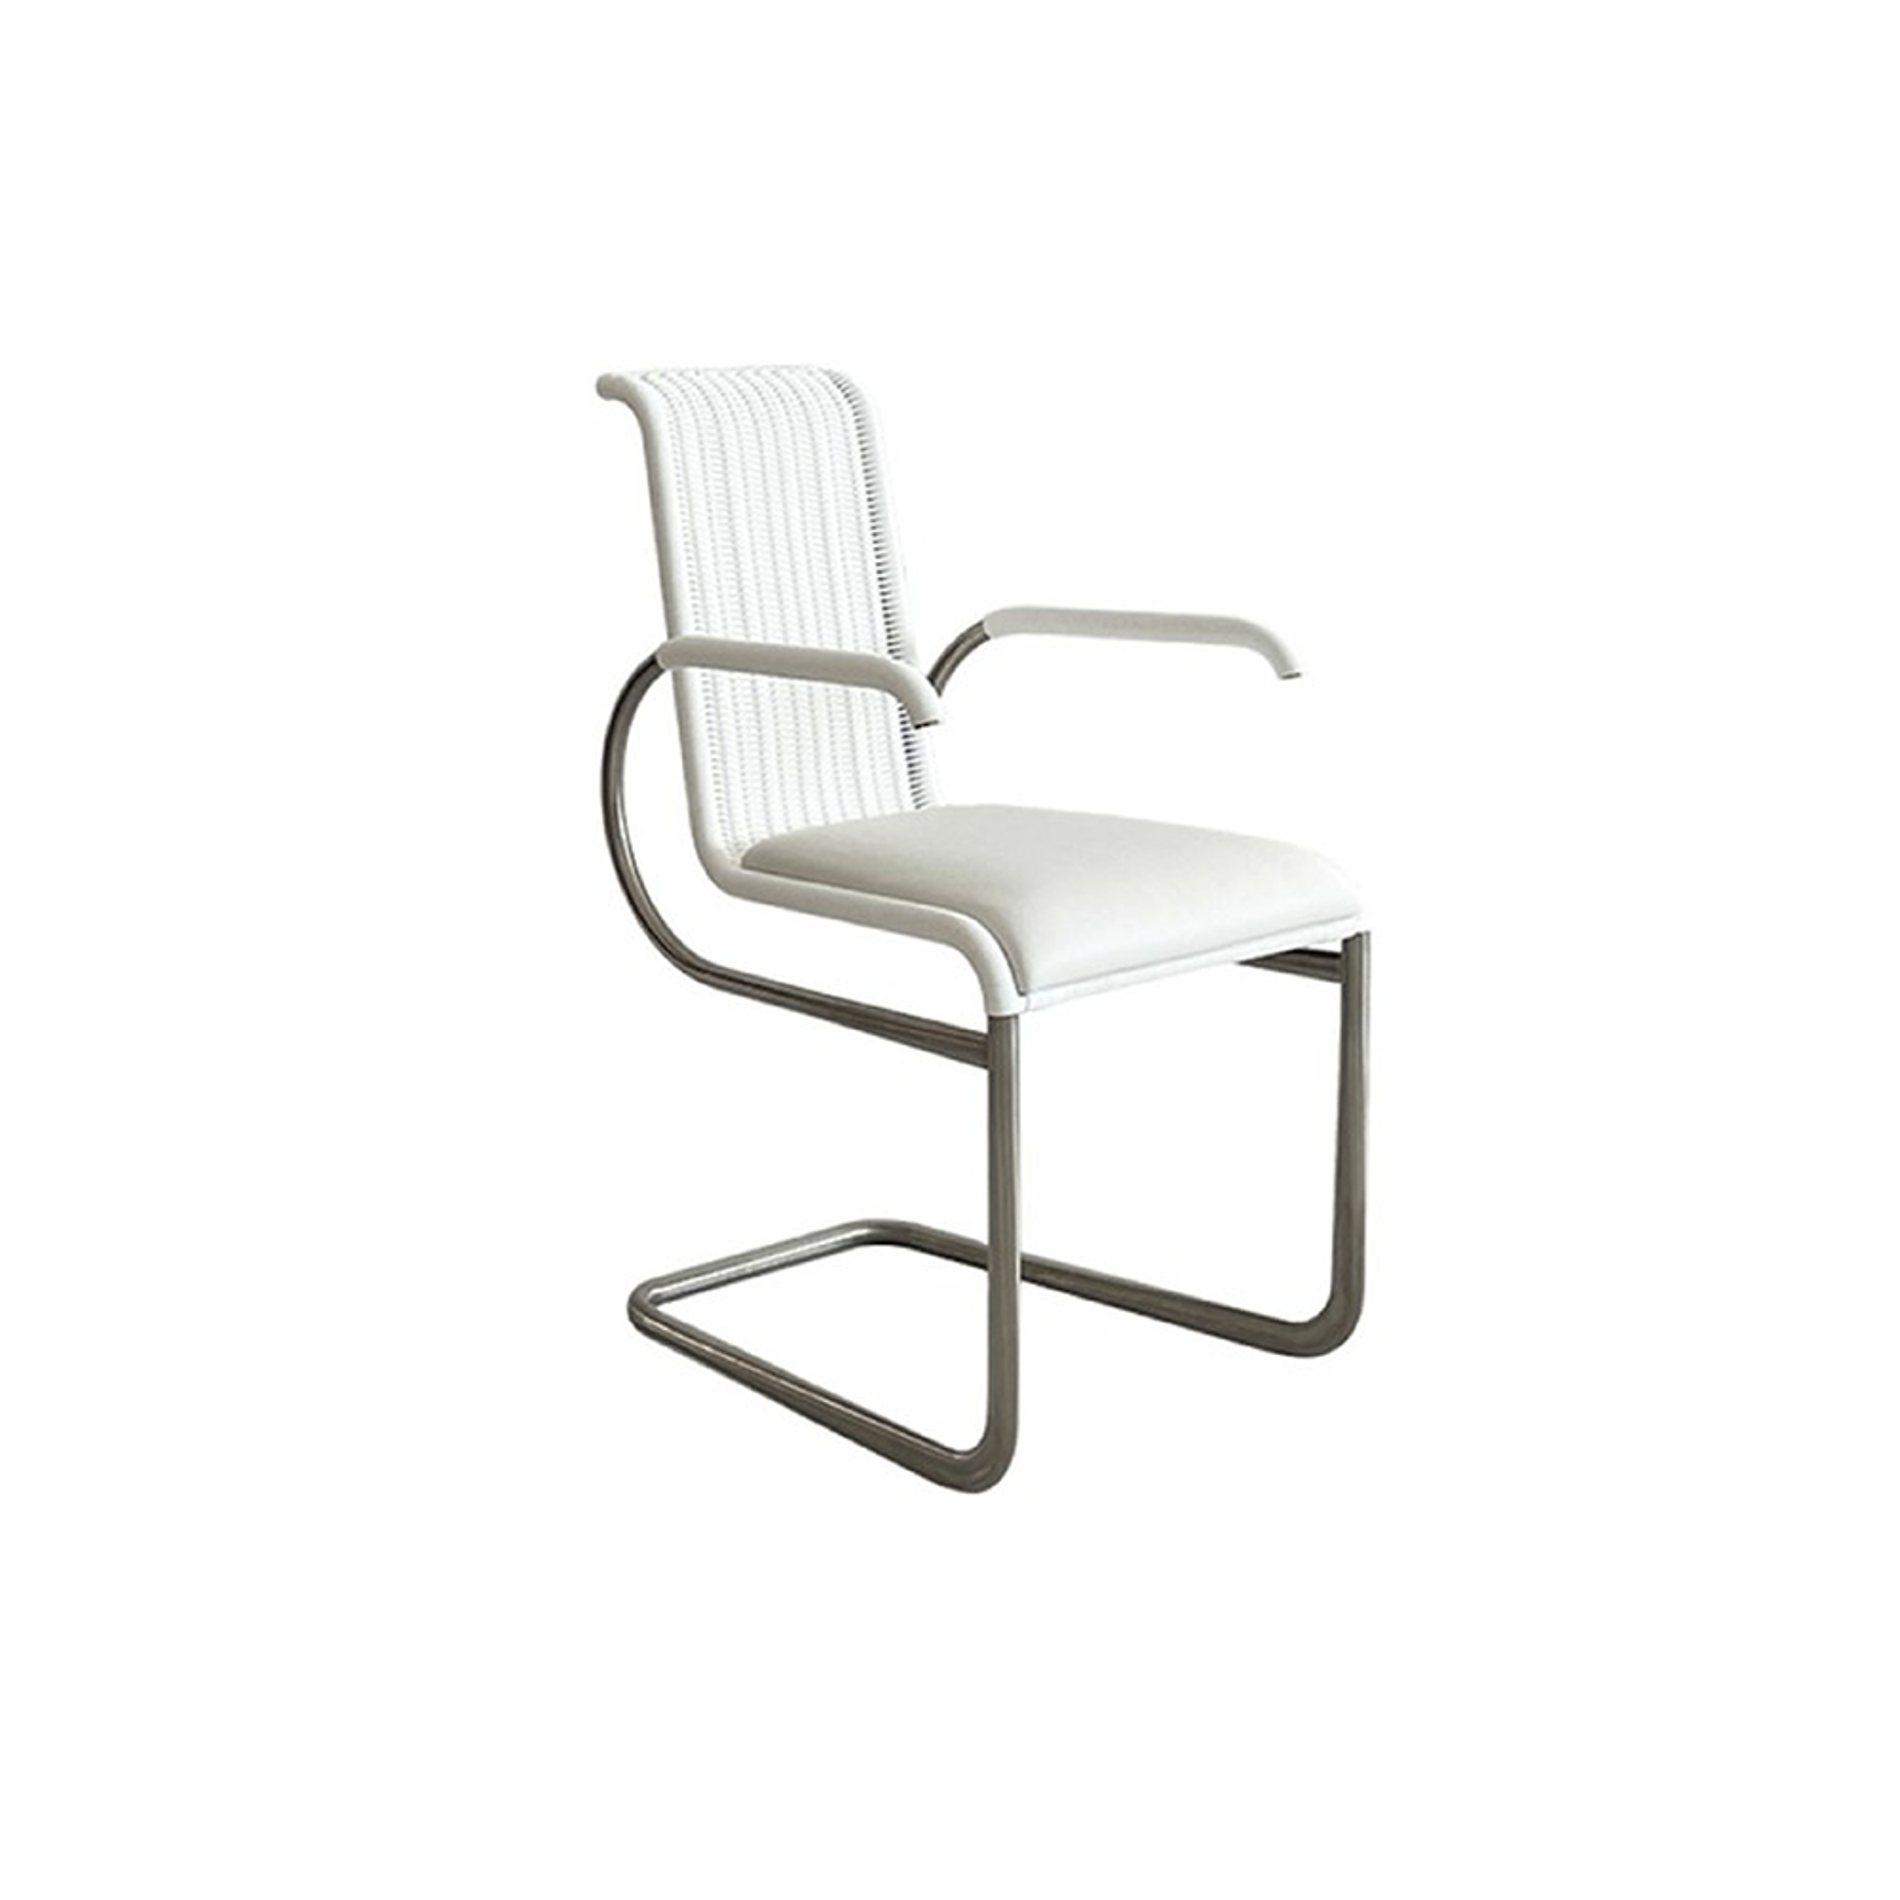 TECTA [Outlet|DP] D22I Cantilever Chair - Cream White